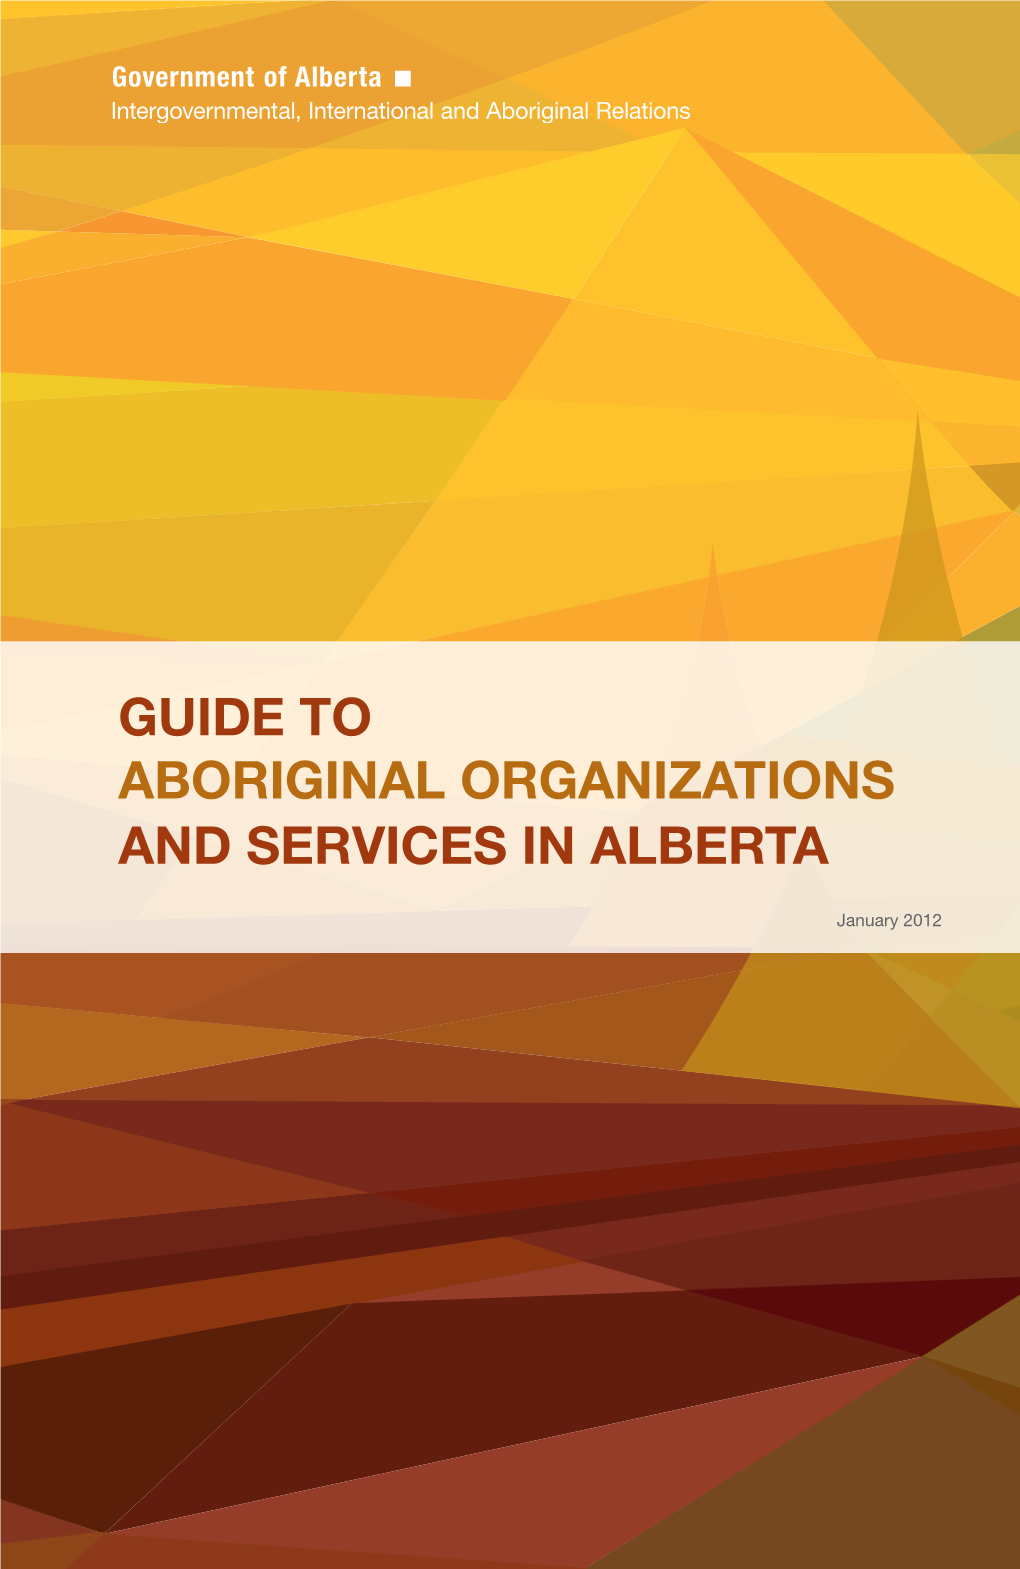 Guide to Aboriginal Organizations and Services in Alberta [January 2012]